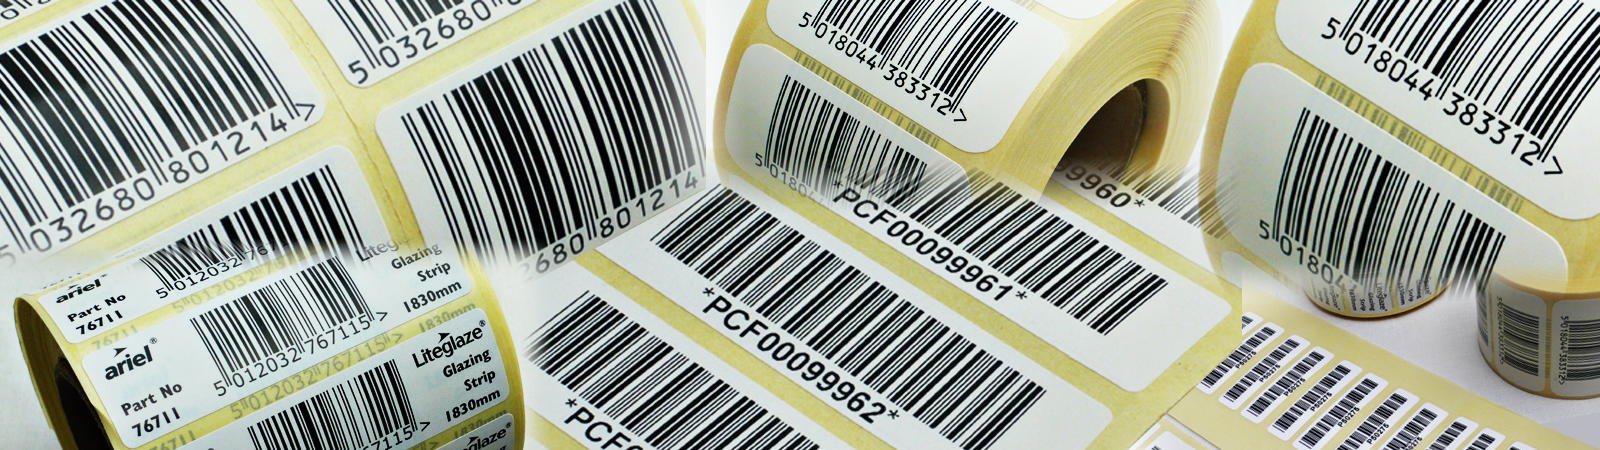 LABEL BANNER Barcode page